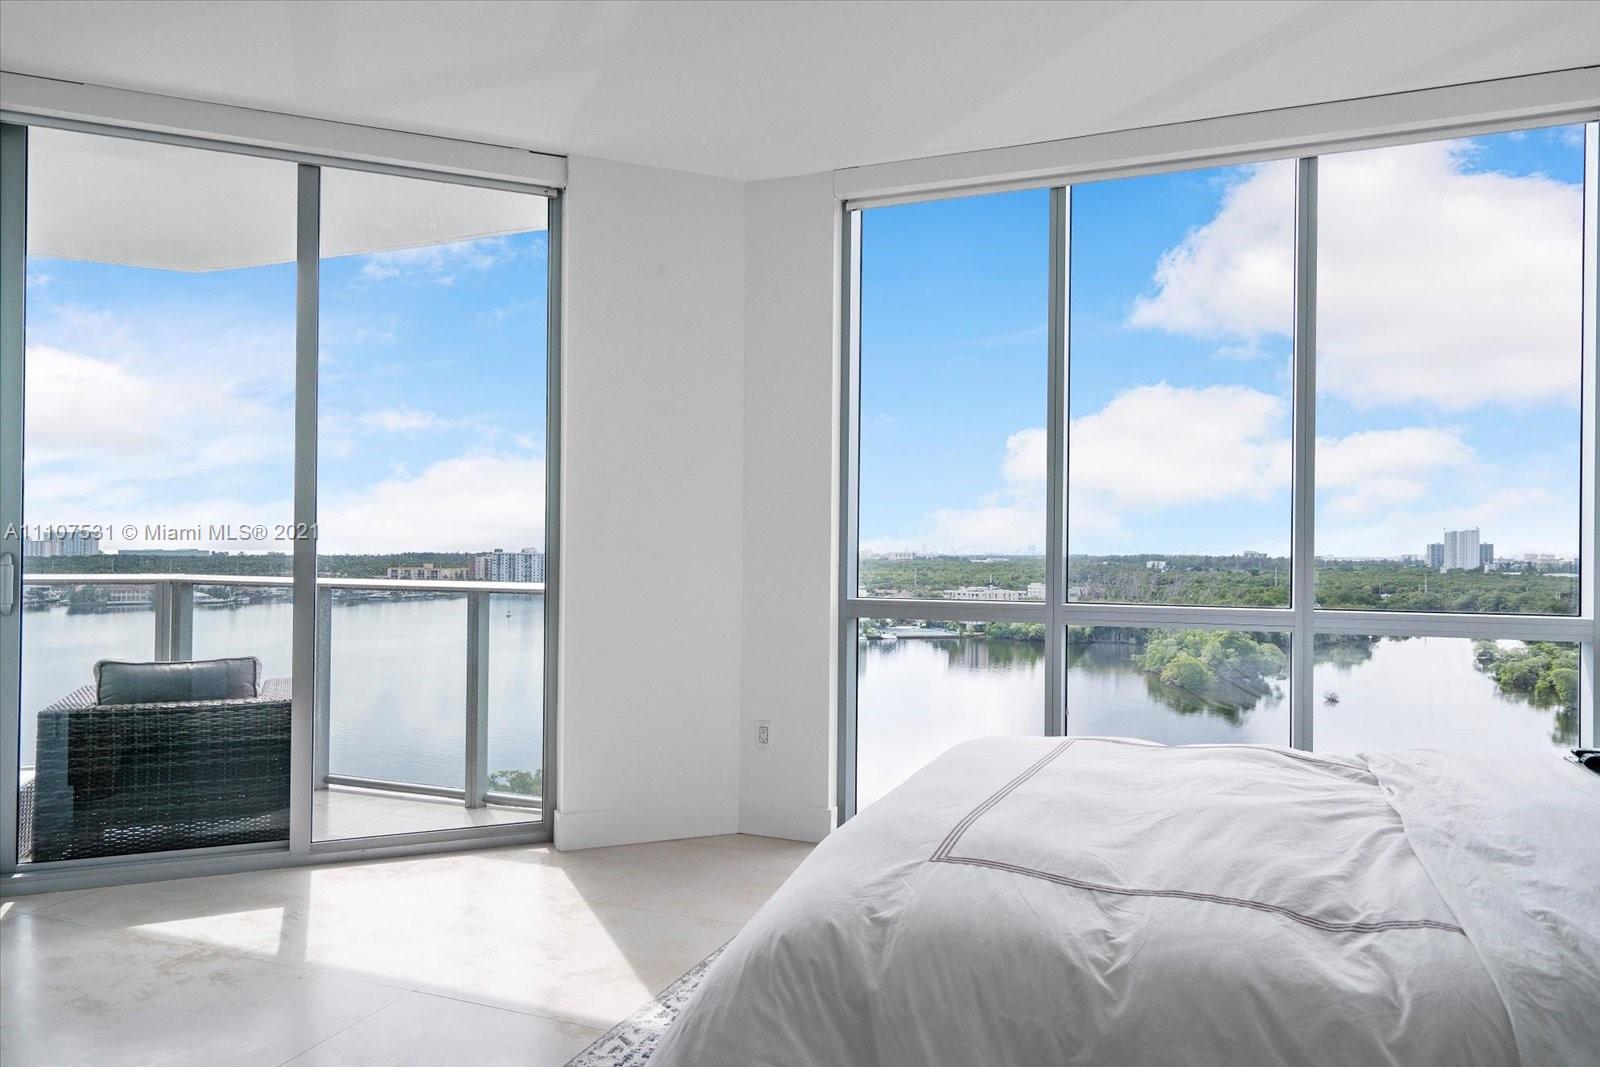 17111 Biscayne Blvd 1204, North Miami Beach, Florida 33160, 2 Bedrooms Bedrooms, ,3 BathroomsBathrooms,Residential,For Sale,17111 Biscayne Blvd 1204,A11107531